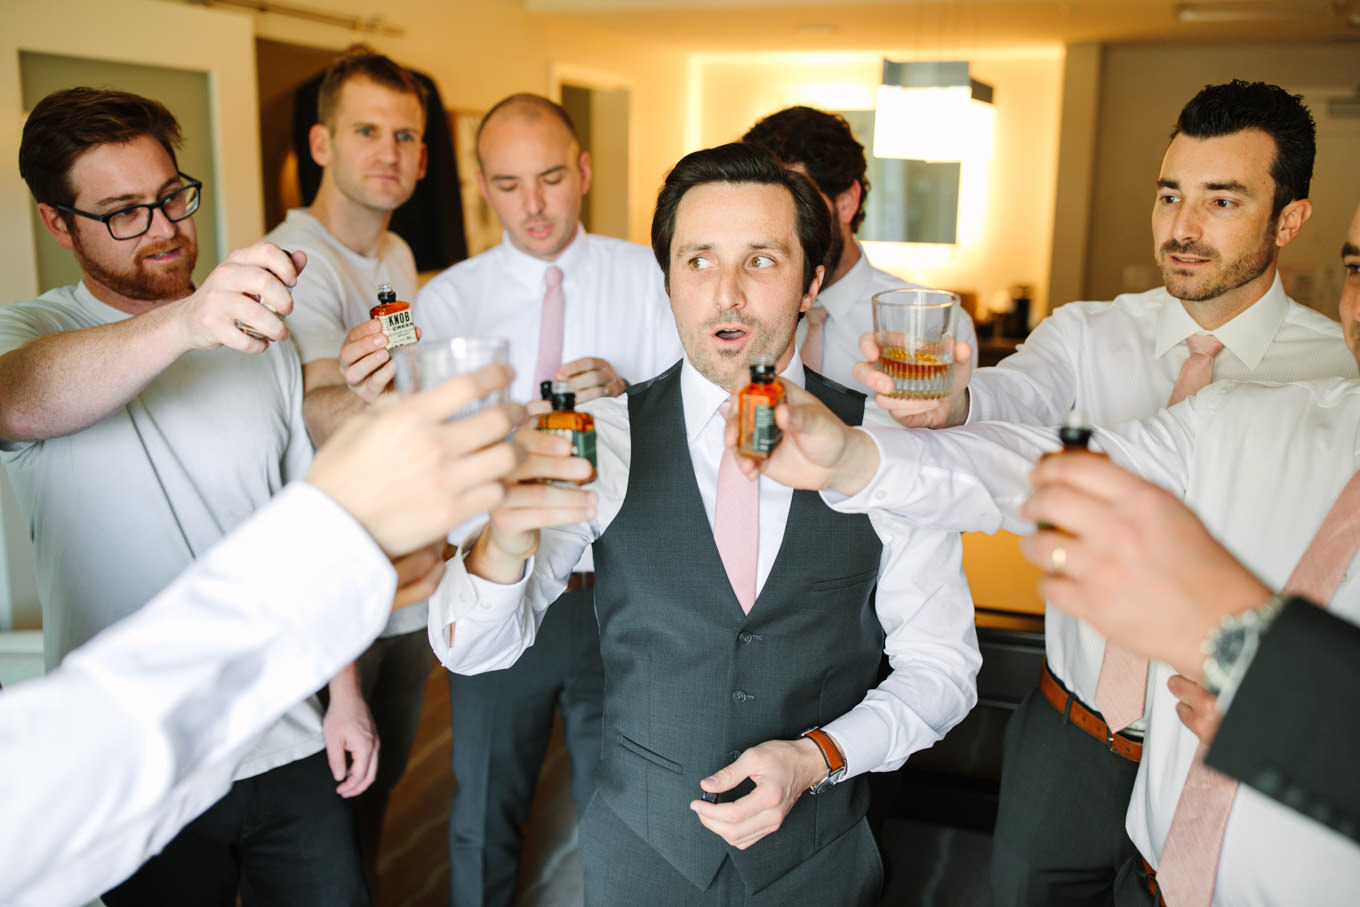 Groomsmen toasting shots of whiskey | Living Desert Zoo & Gardens wedding with unique details | Elevated and colorful wedding photography for fun-loving couples in Southern California |  #PalmSprings #palmspringsphotographer #gardenwedding #palmspringswedding  Source: Mary Costa Photography | Los Angeles wedding photographer 